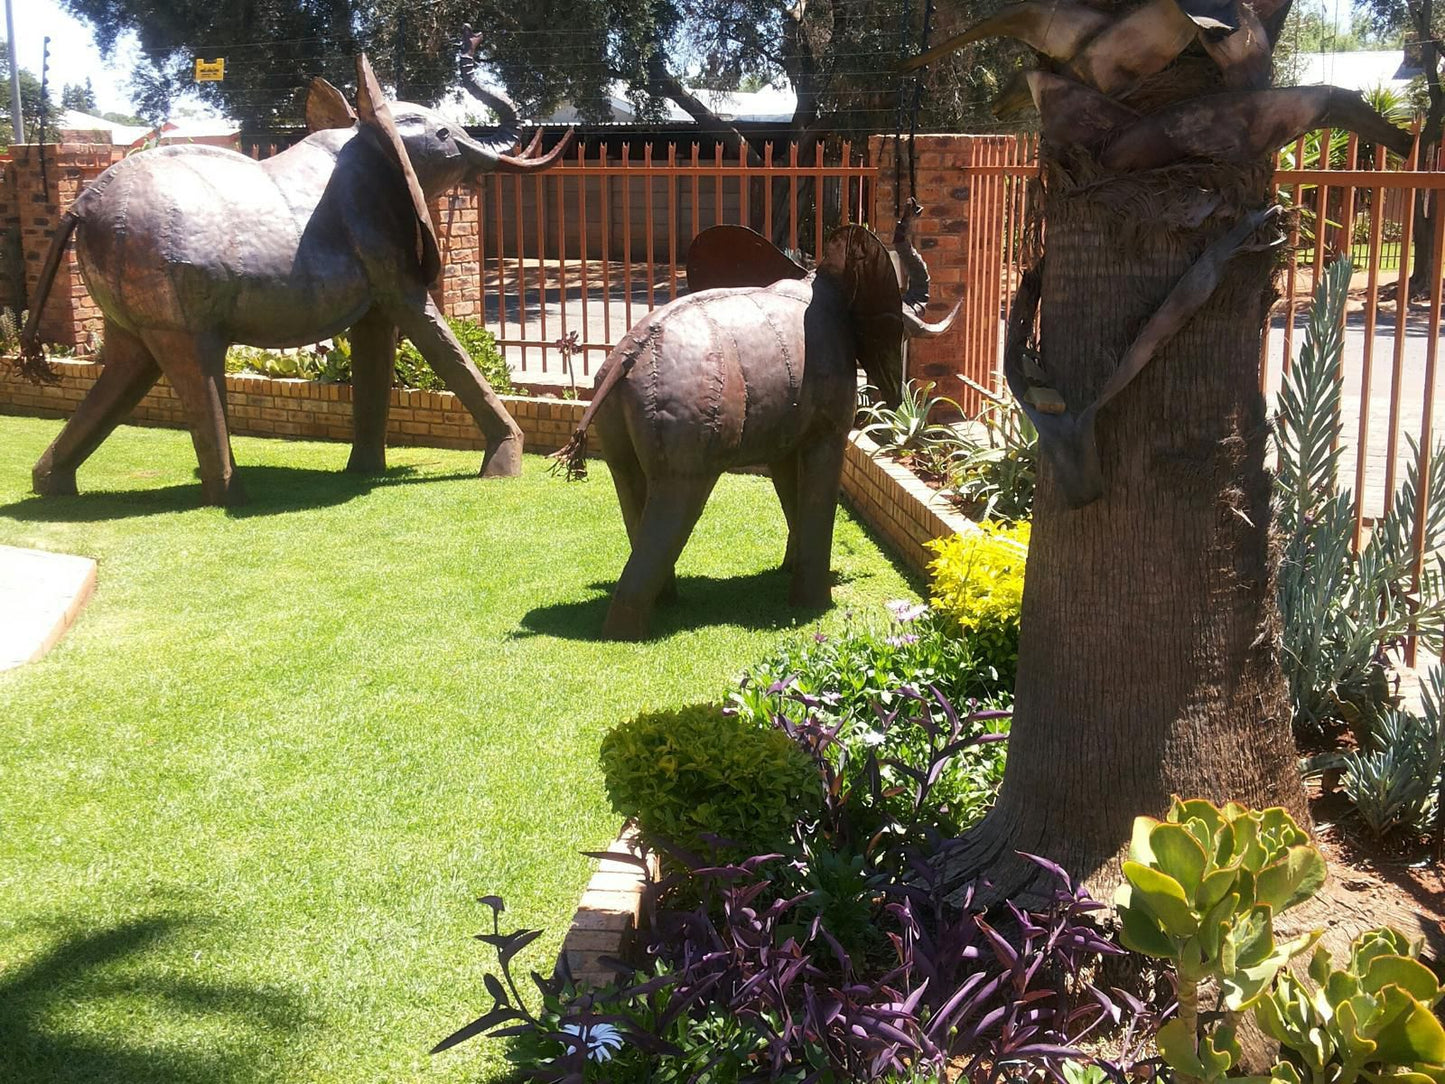 Sweet Dreams Guesthouse Kimberley Northern Cape South Africa Elephant, Mammal, Animal, Herbivore, Garden, Nature, Plant